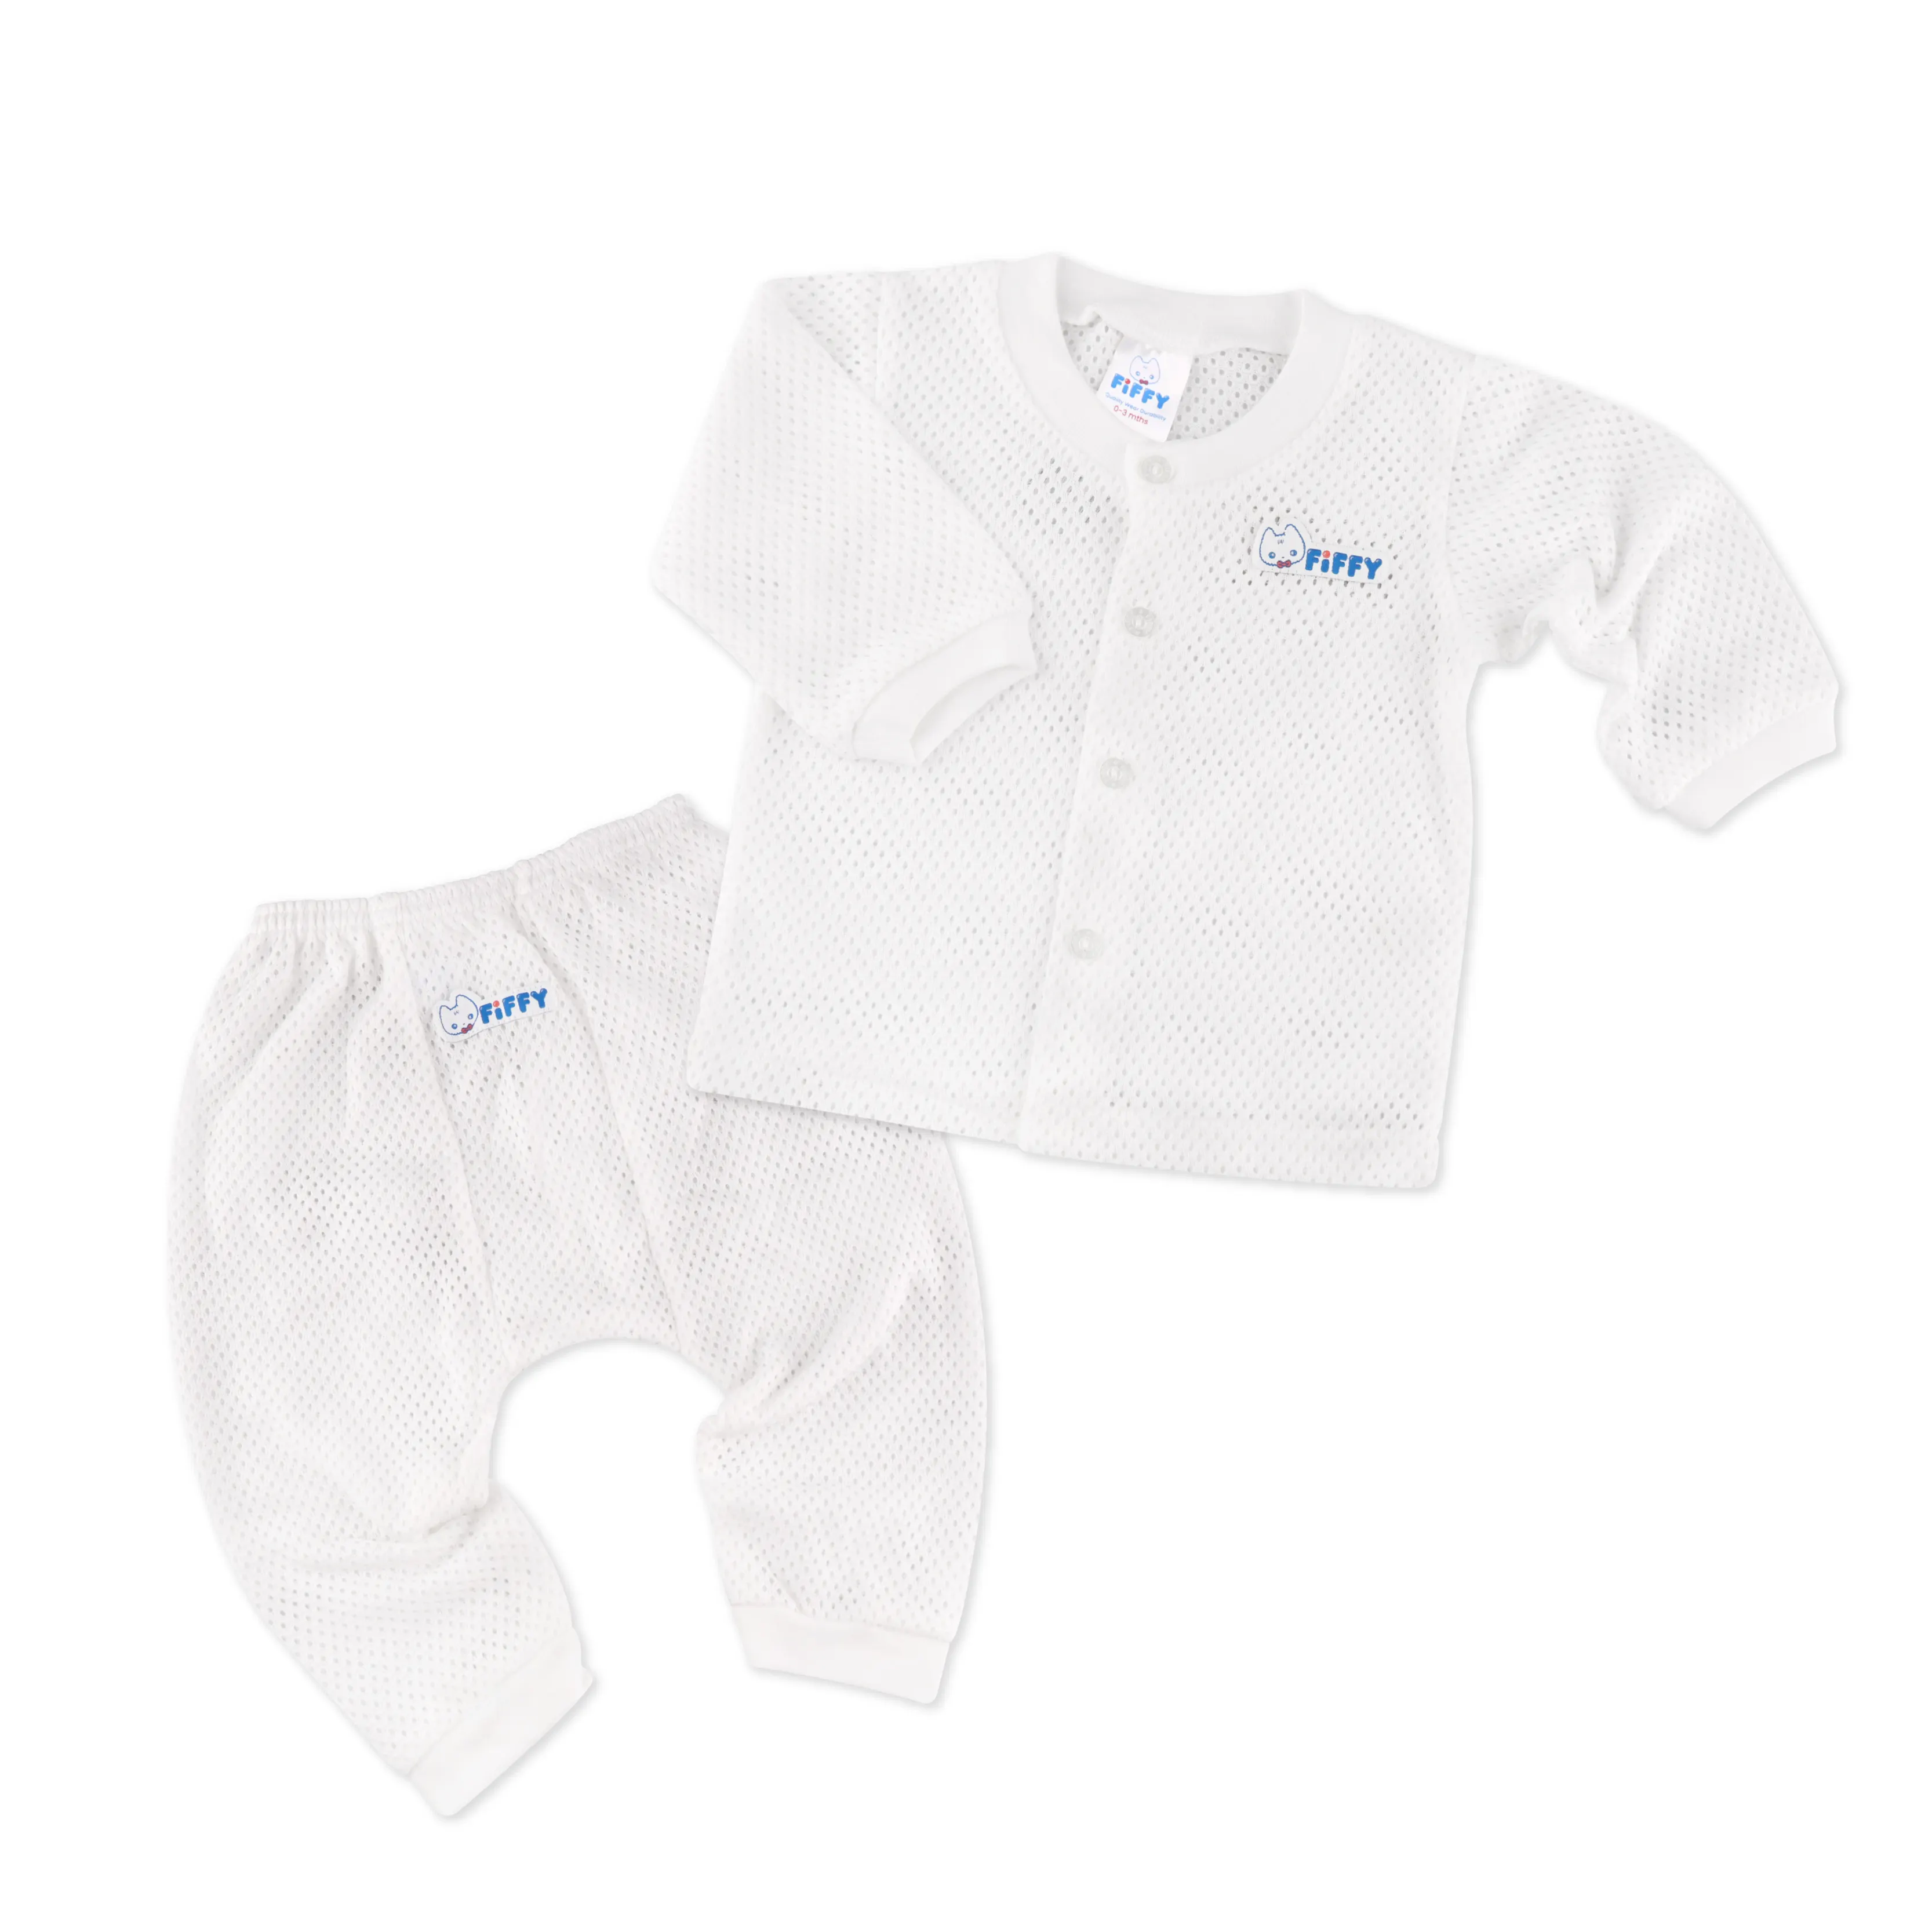 FIFFY Baby Apparel Baby Suit Unisex Long Sleeve Vest and Pant Suit Baby Apparel (White)